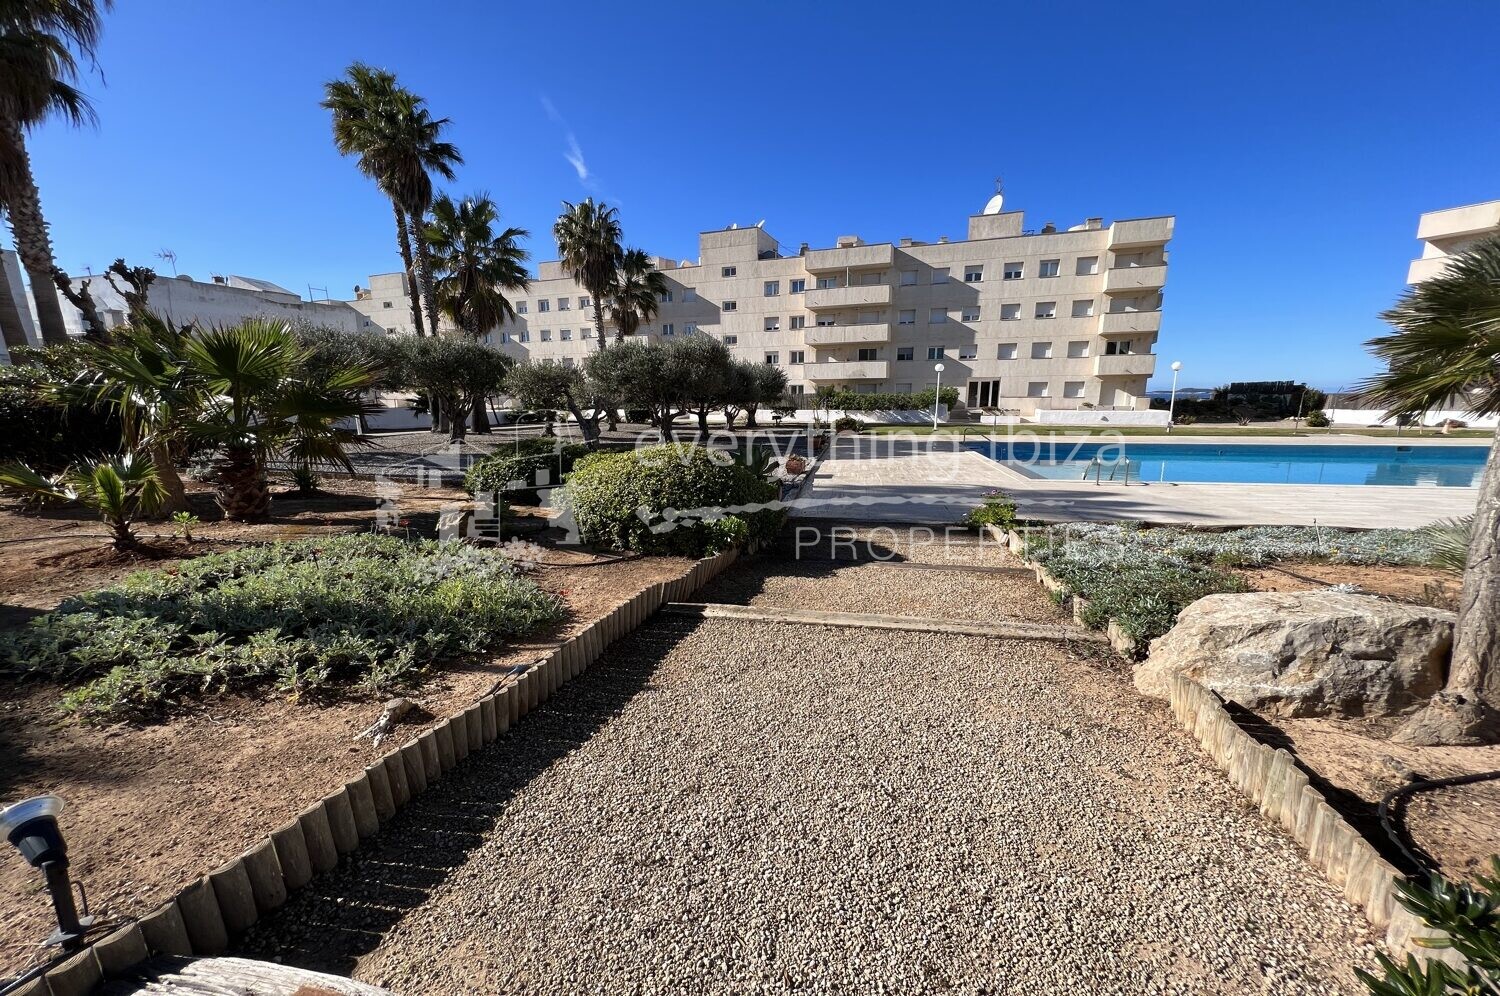 Coastline Penthouse with Roof Terrace & Sea Views, ref. 1436, for sale in Ibiza by everything ibiza Properties